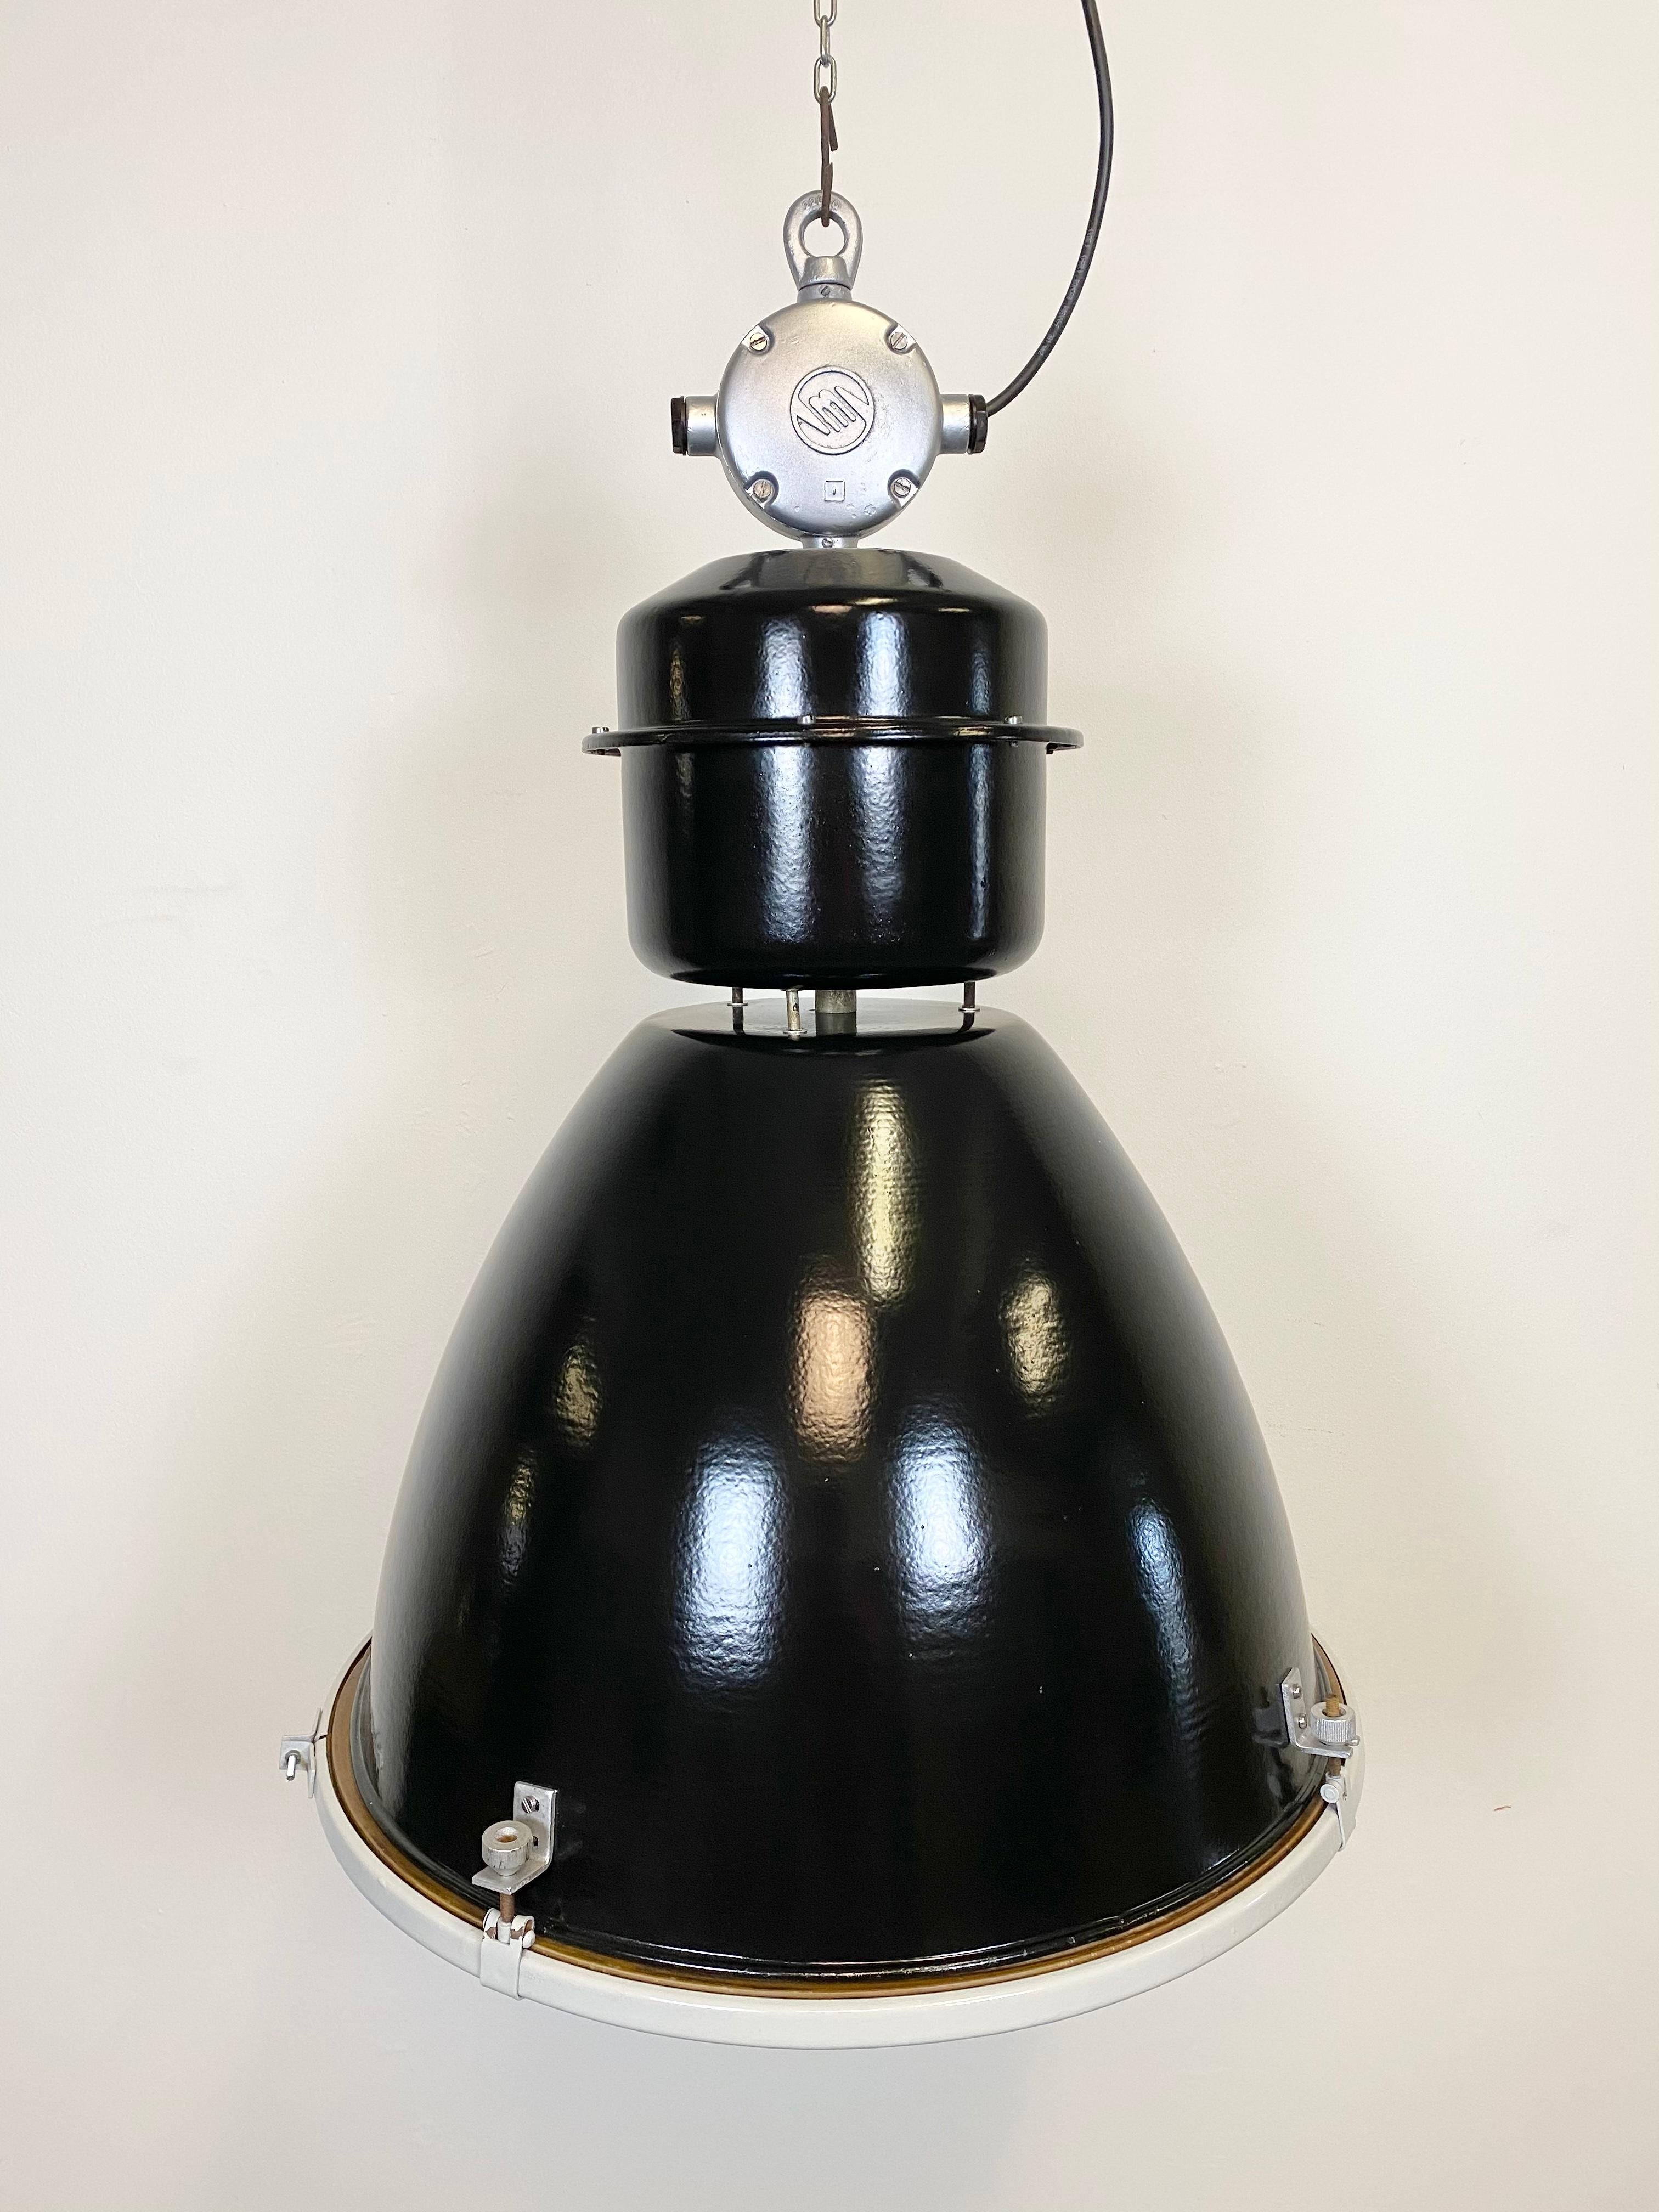 This black industrial pendant light was designed in the 1960s and produced by Elektrosvit in the former Czechoslovakia. It features a cast aluminium top, a black exterior, a white enamel interior and clear glass cover.
New porcelain socket for E 27